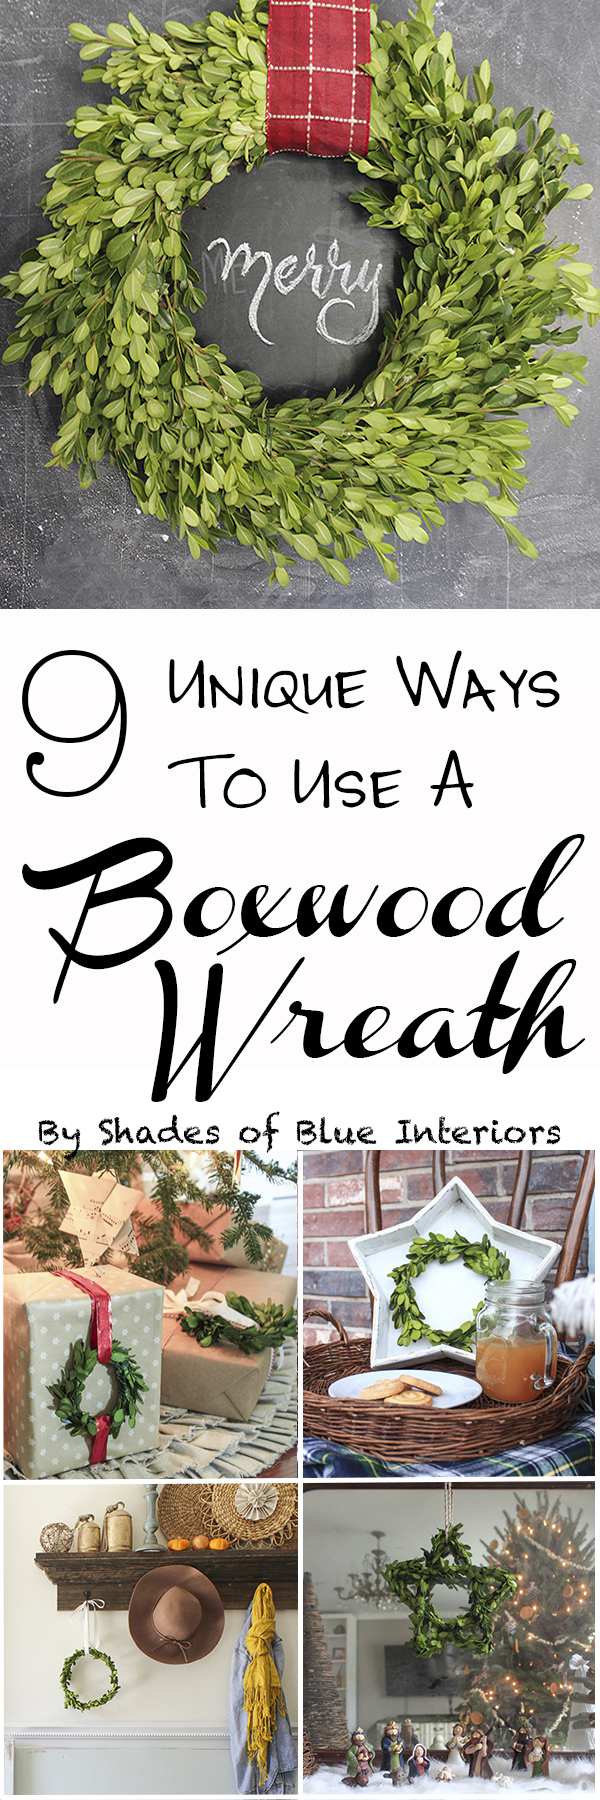 9 Unique Ways to Use a Boxwood Wreath + Tutorial